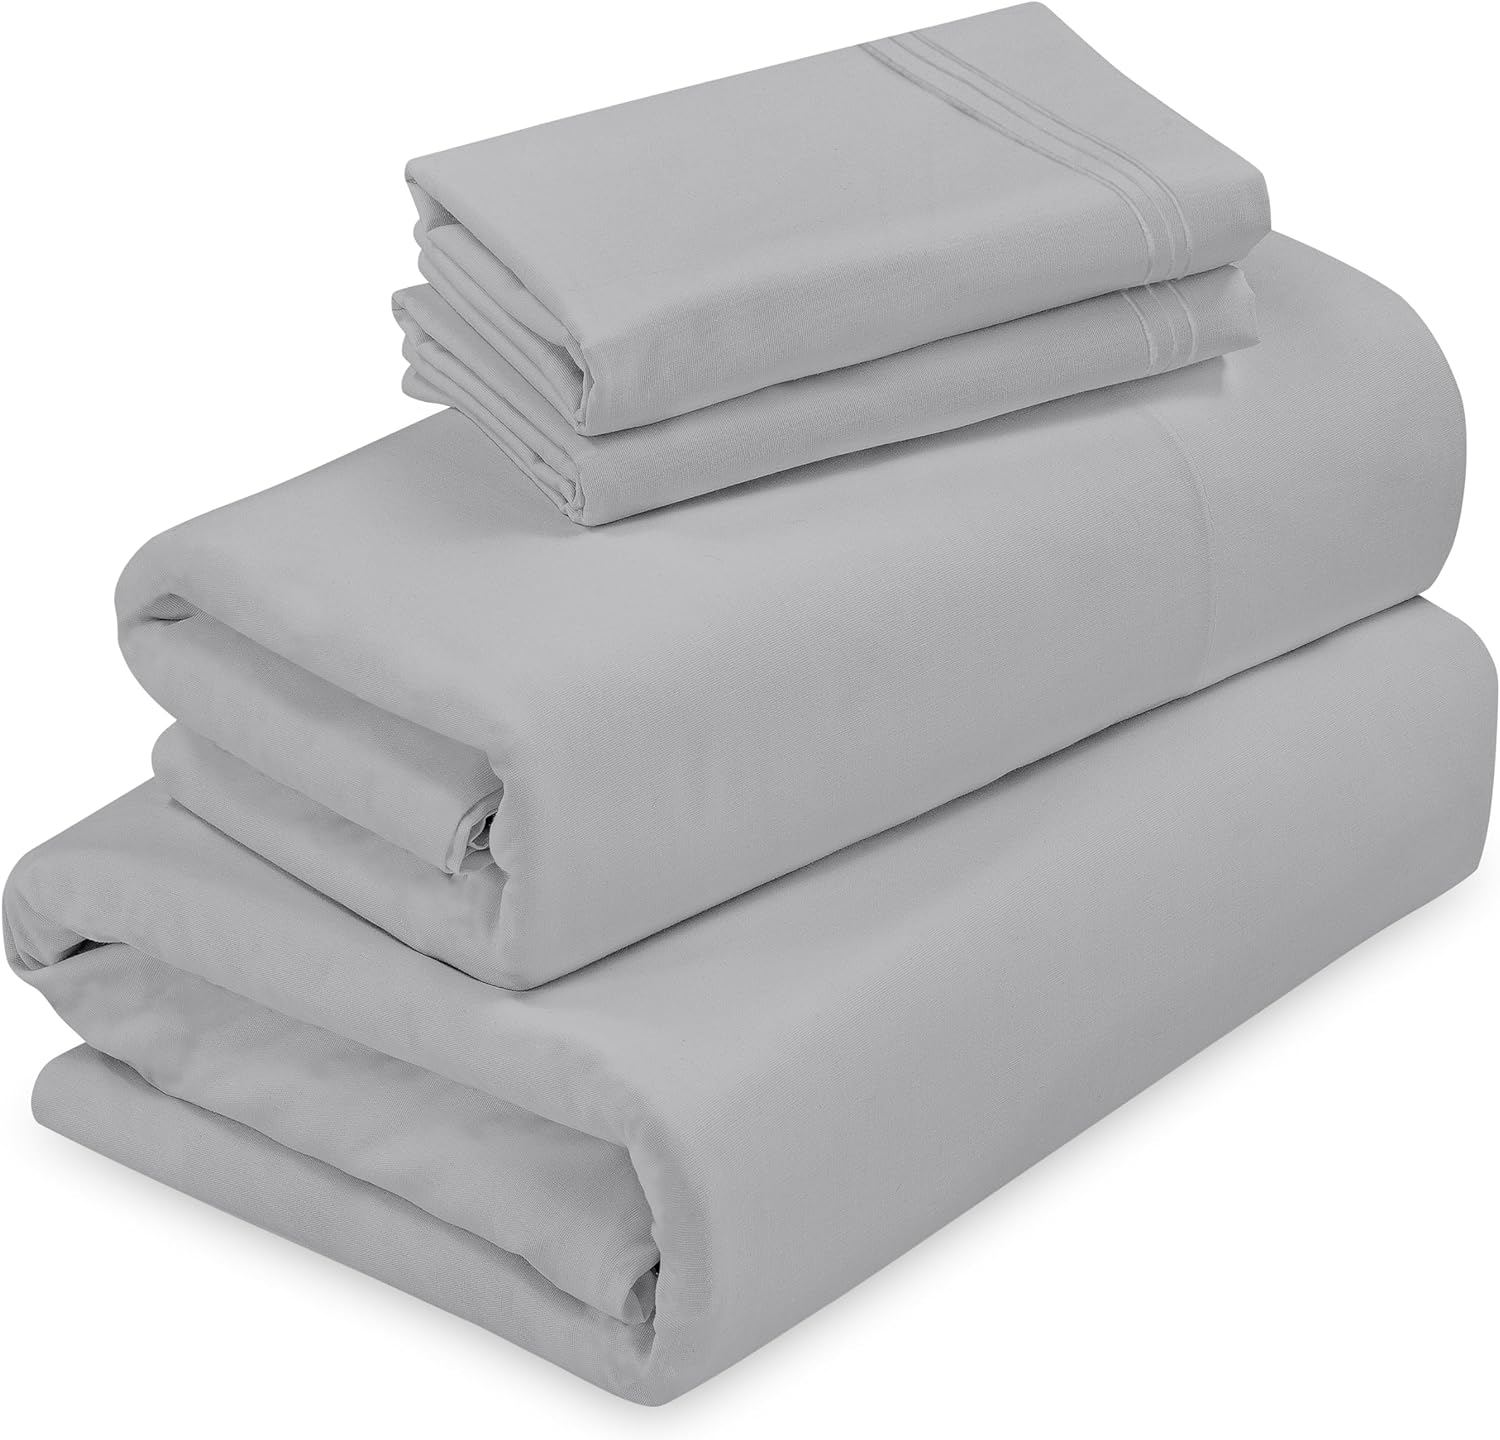 ROYALE LINENS - 4 Piece Full Bed Sheet - Soft Brushed Microfiber 1800 Bedding Set - 1 Fitted Sheet, 1 Flat Sheet, 2 Pillow Case - Wrinkle & Fade Resistant Luxury Full Size Sheet Set (Full, Silver)